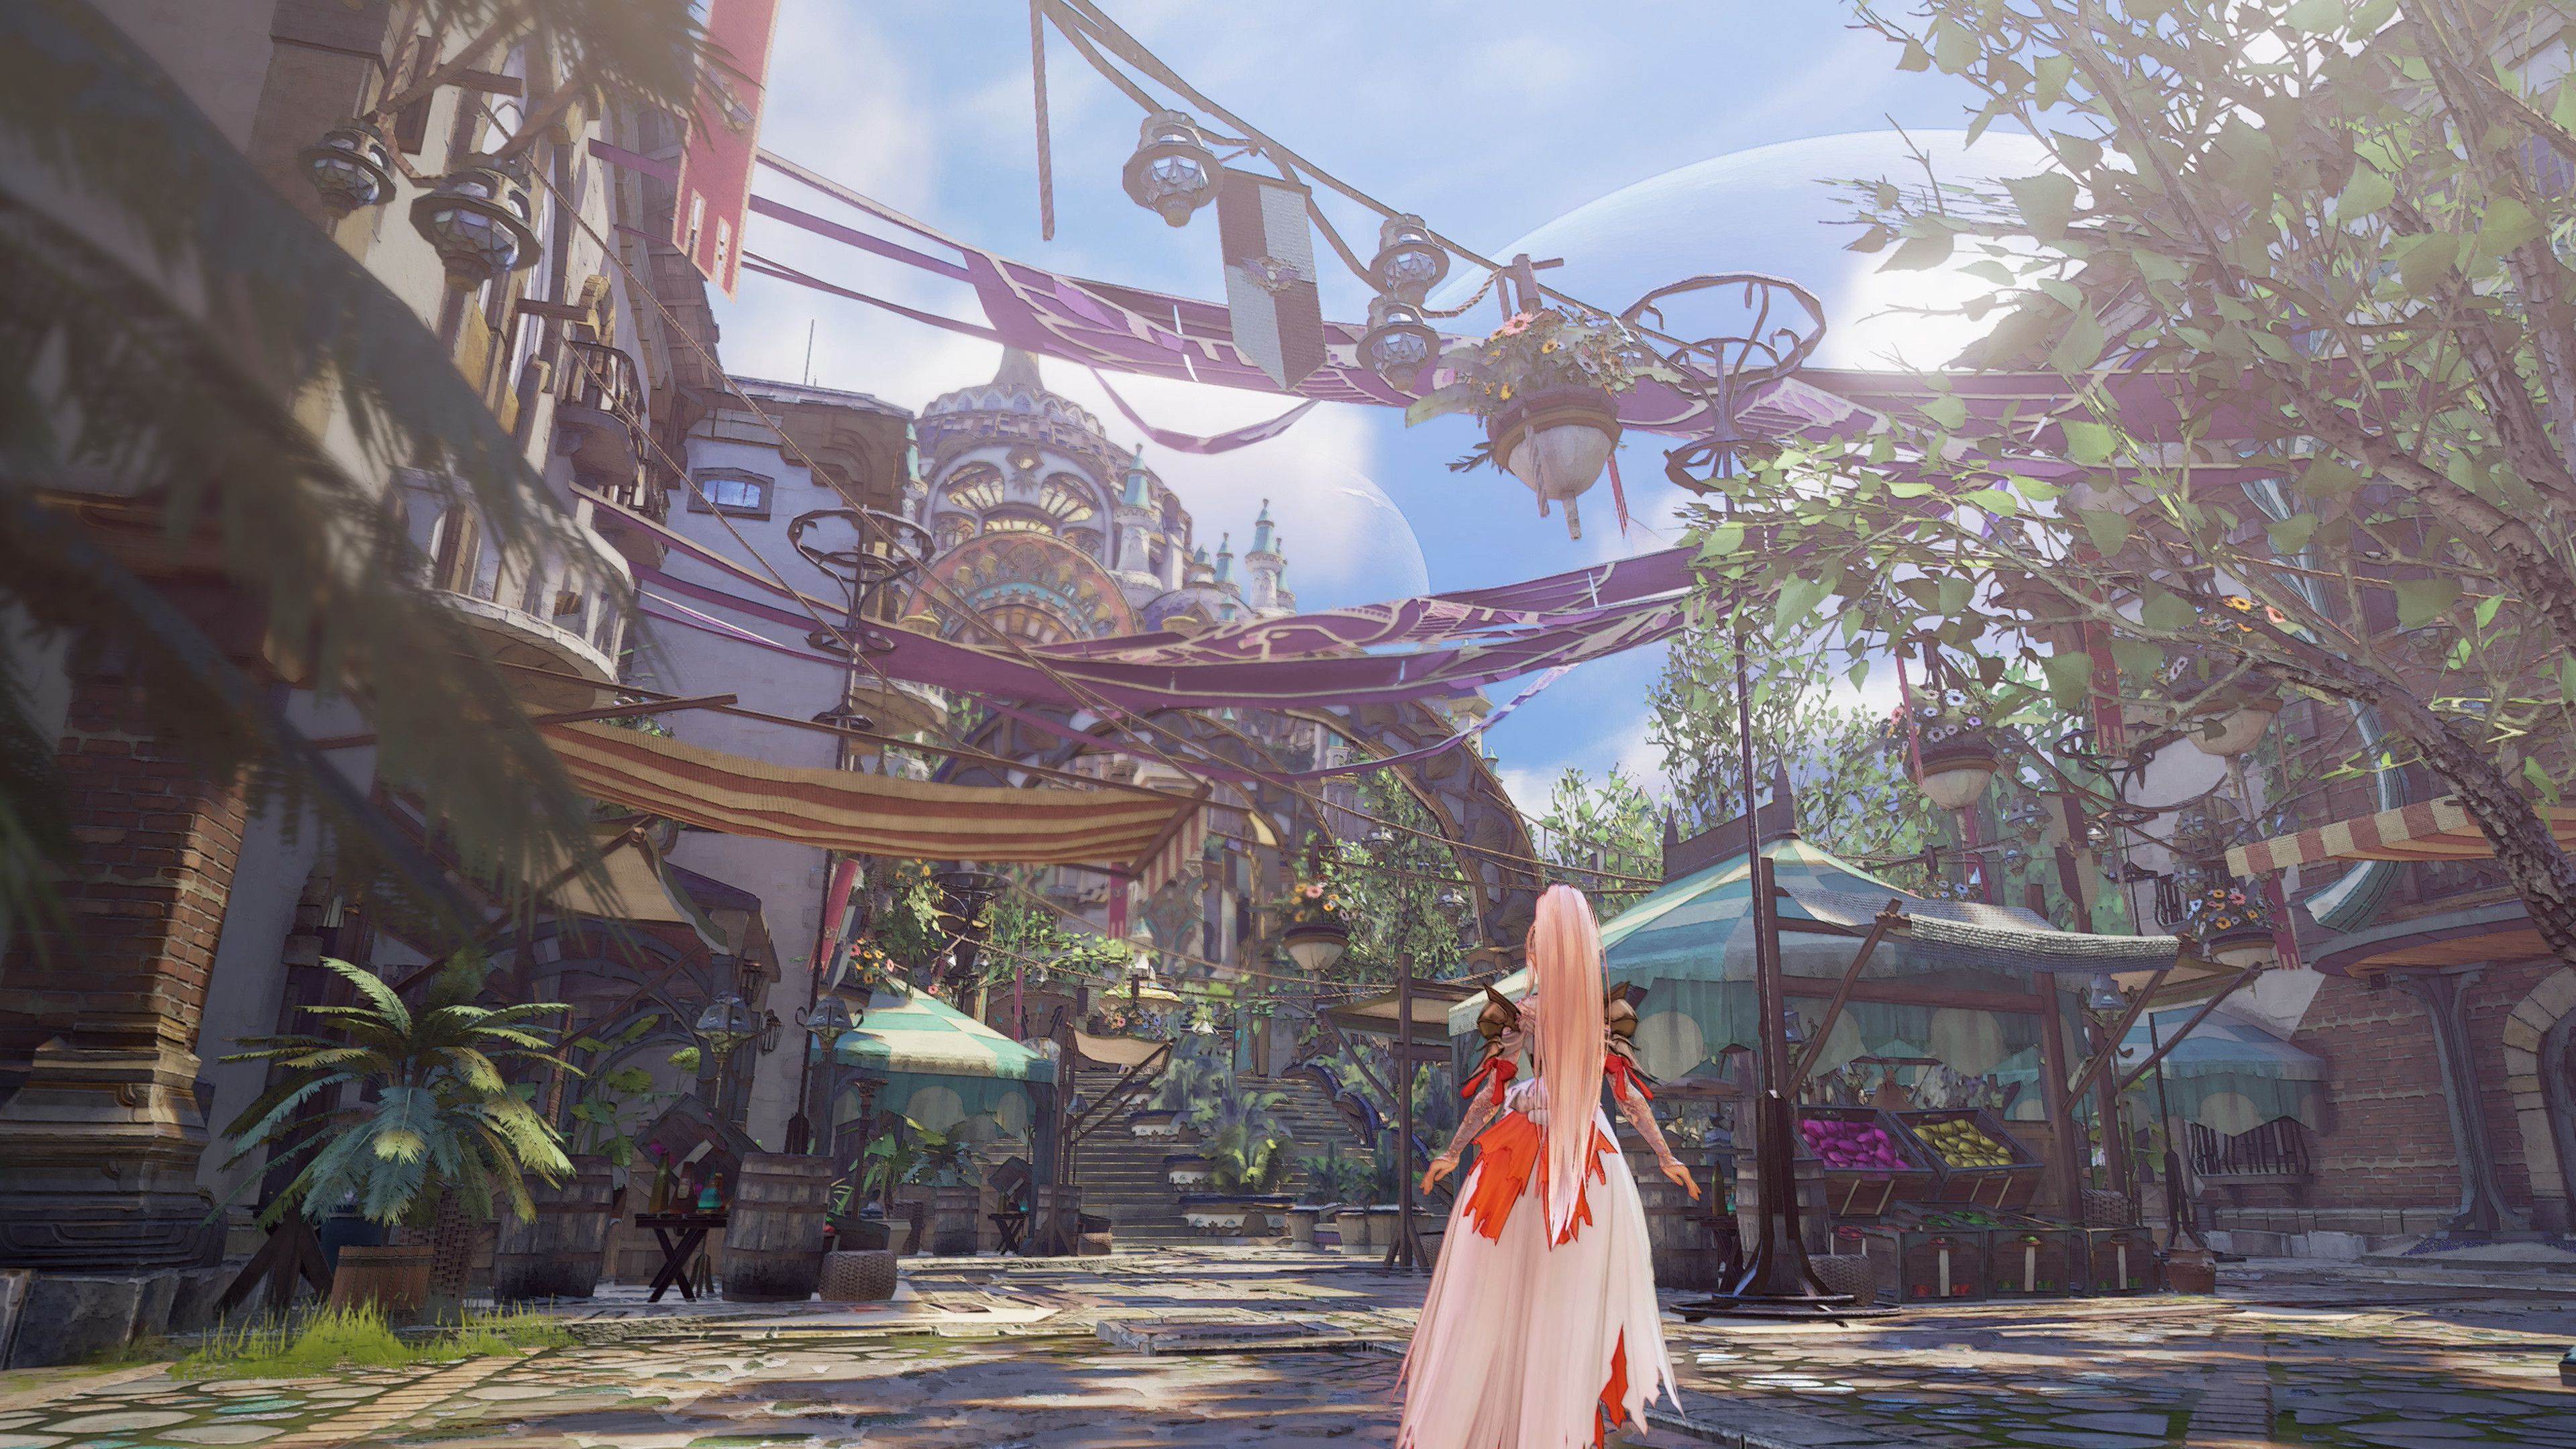 Tales of Arise Interview Yusuke Tomizawa On Reinventing The JRPG VTubers and Queer Representation